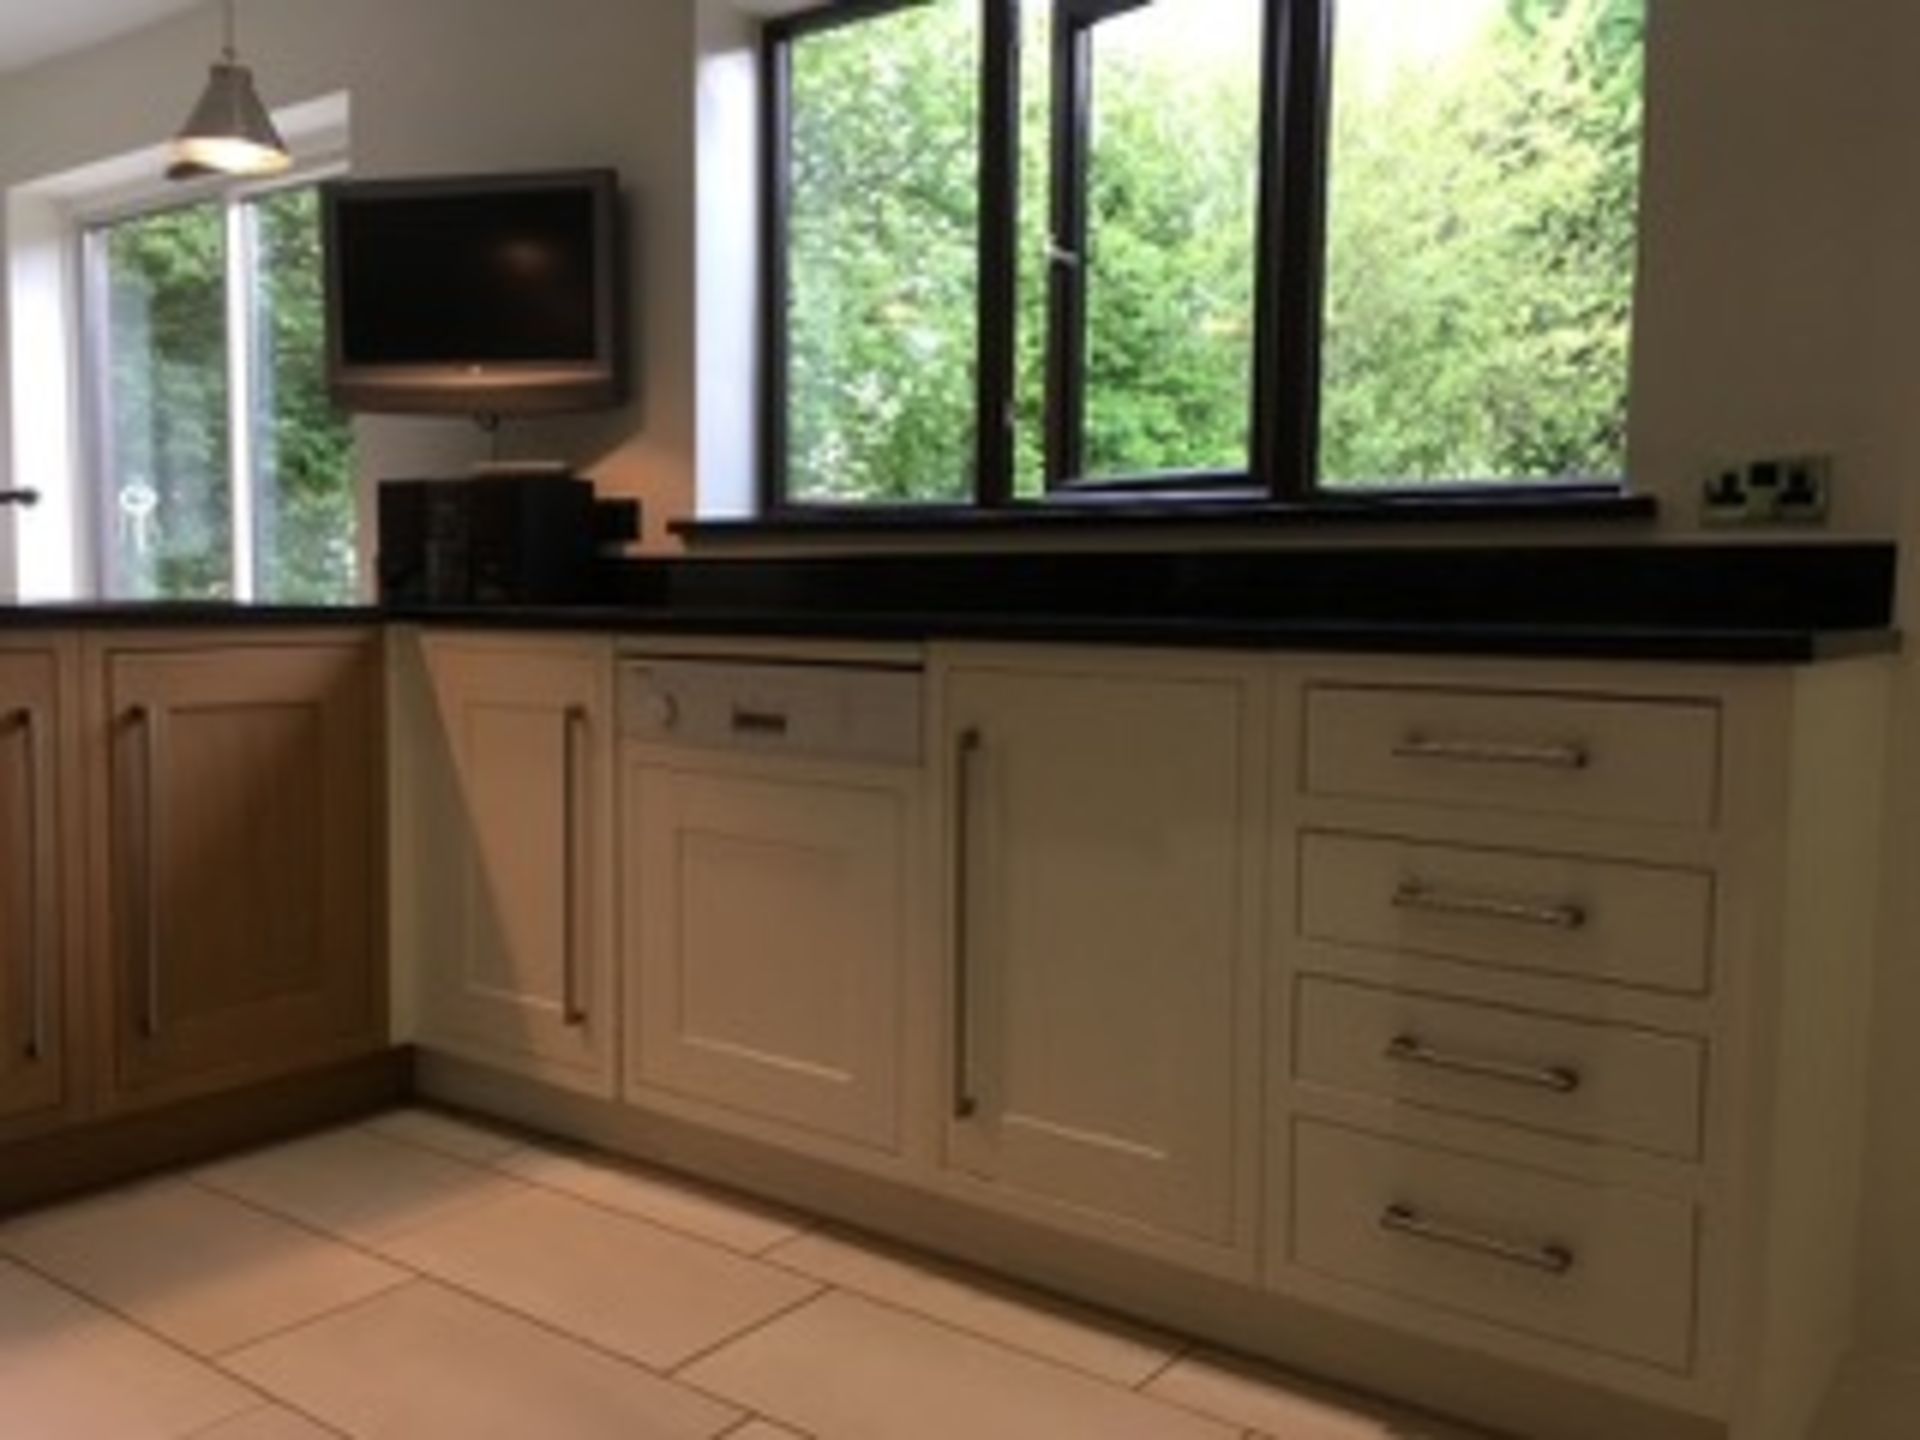 1 x Bespoke Solid Wood Fitted Kitchen With Granite Worktops - Pre-owned In Good Condtion - CL172 - - Image 11 of 22